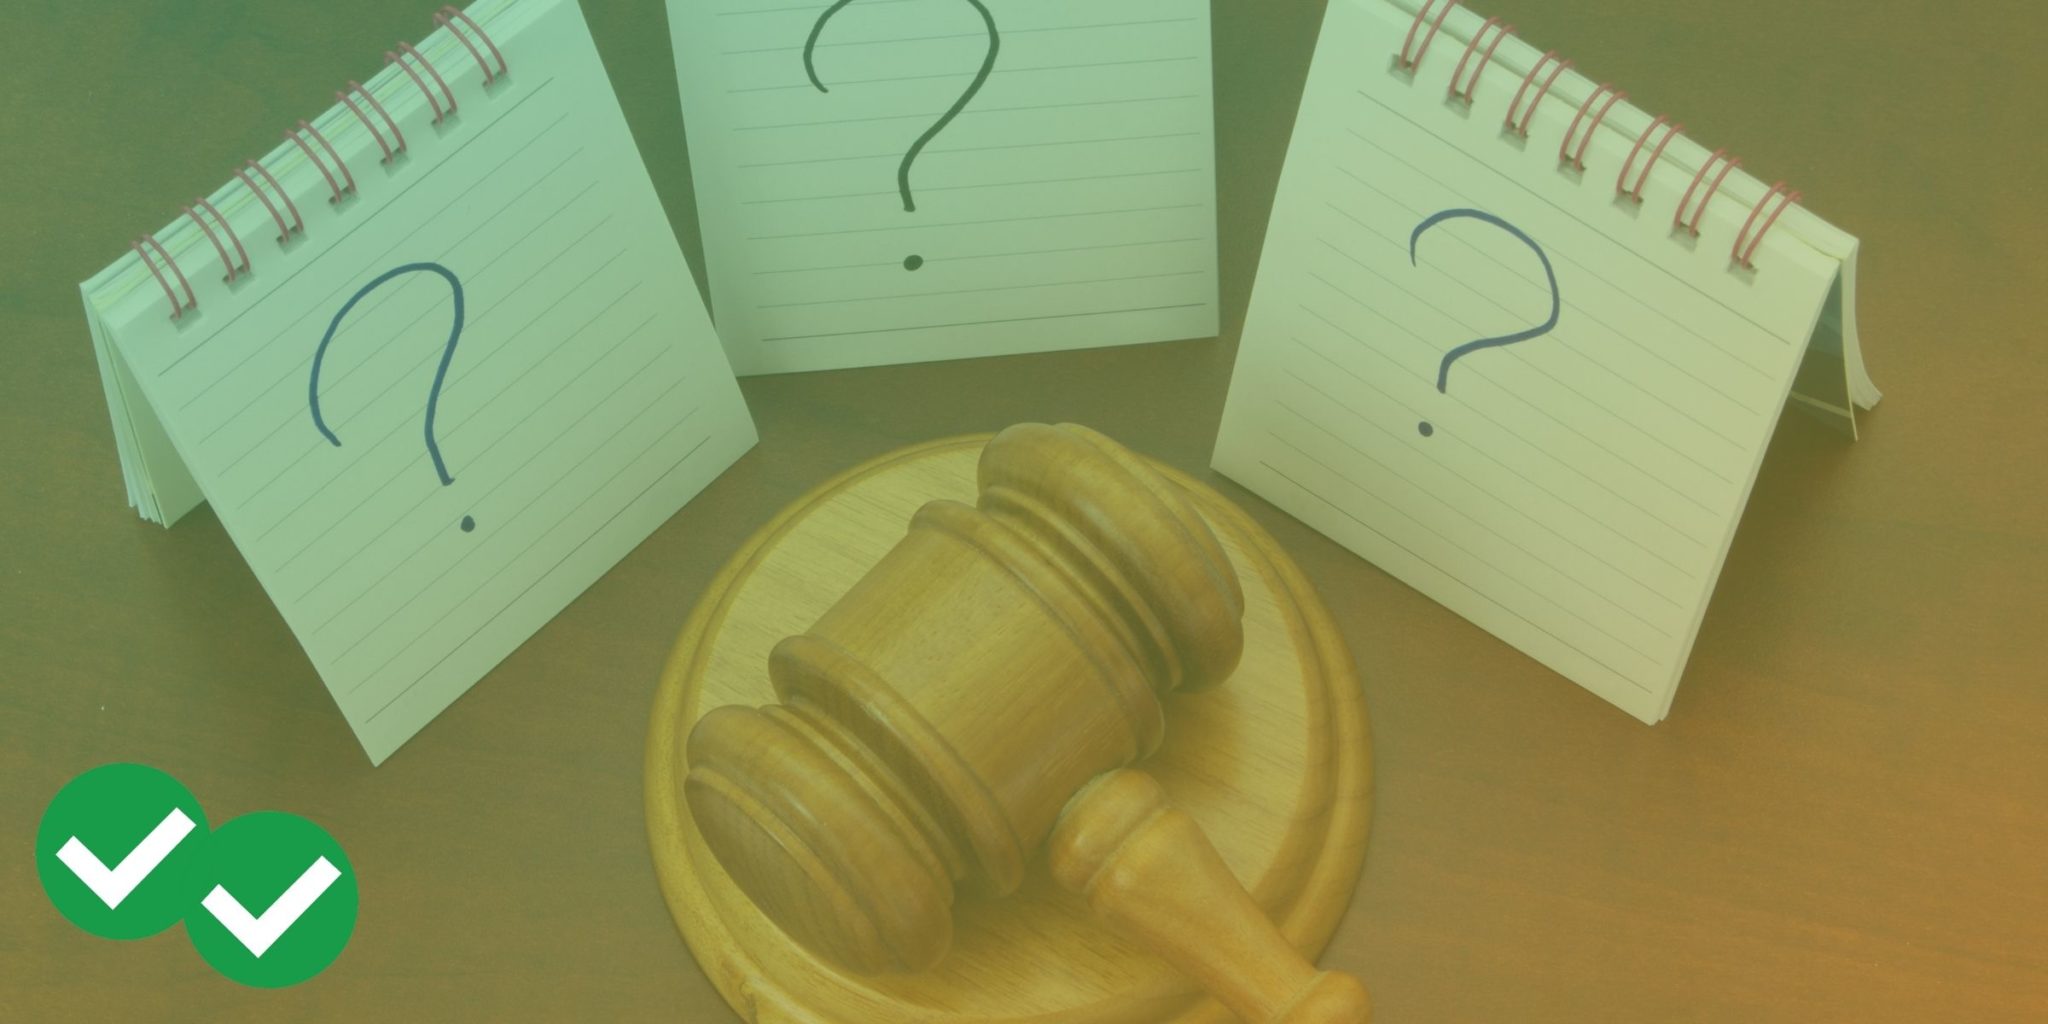 Gavel and cards with question marks indicating LSAT sections - image by Magoosh